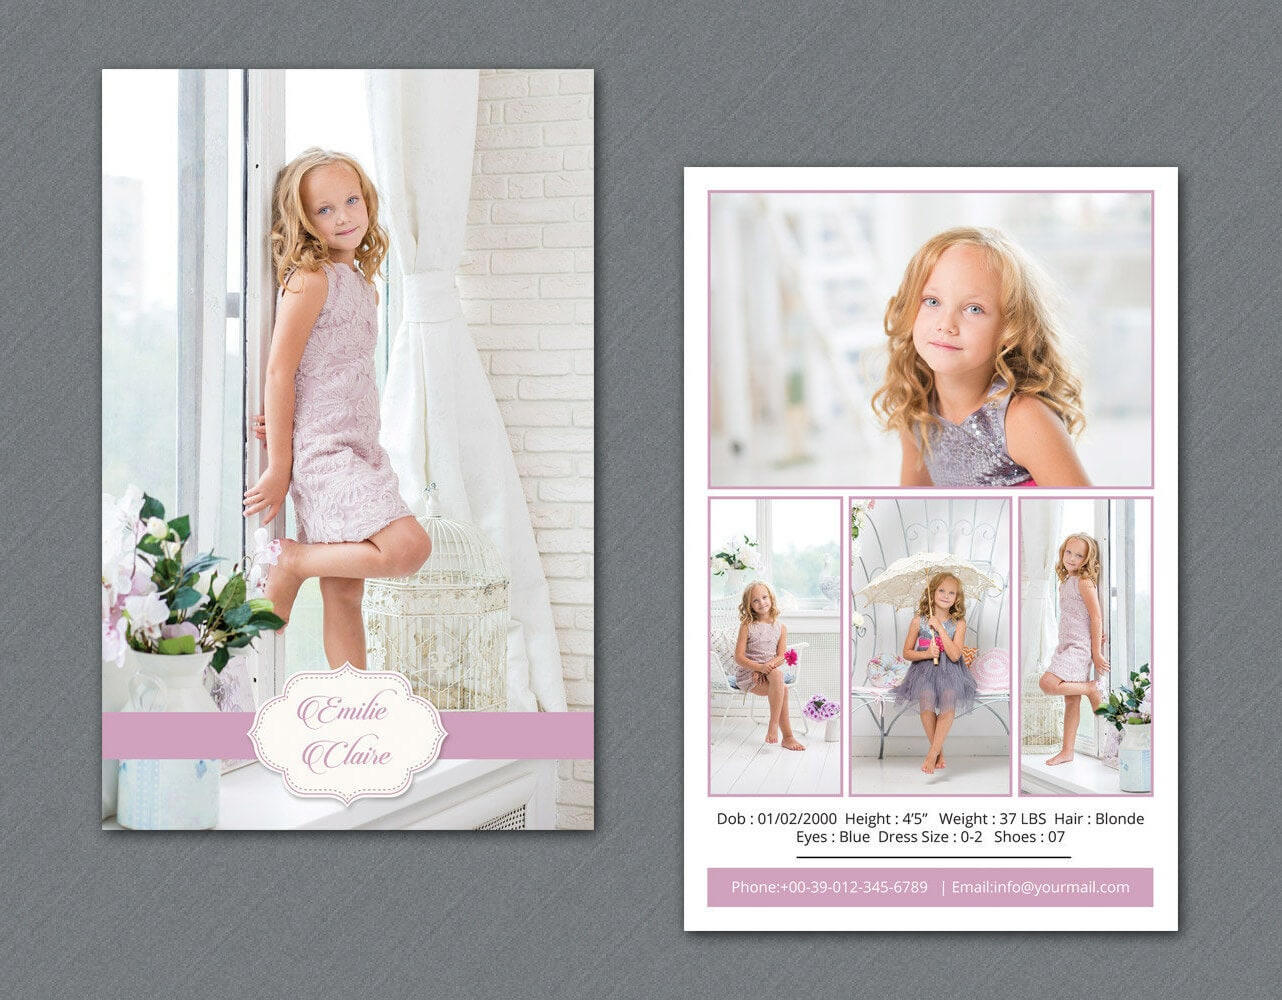 Comp Card Templates ] – On Sale Model Comp Card Photoshop Throughout Download Comp Card Template